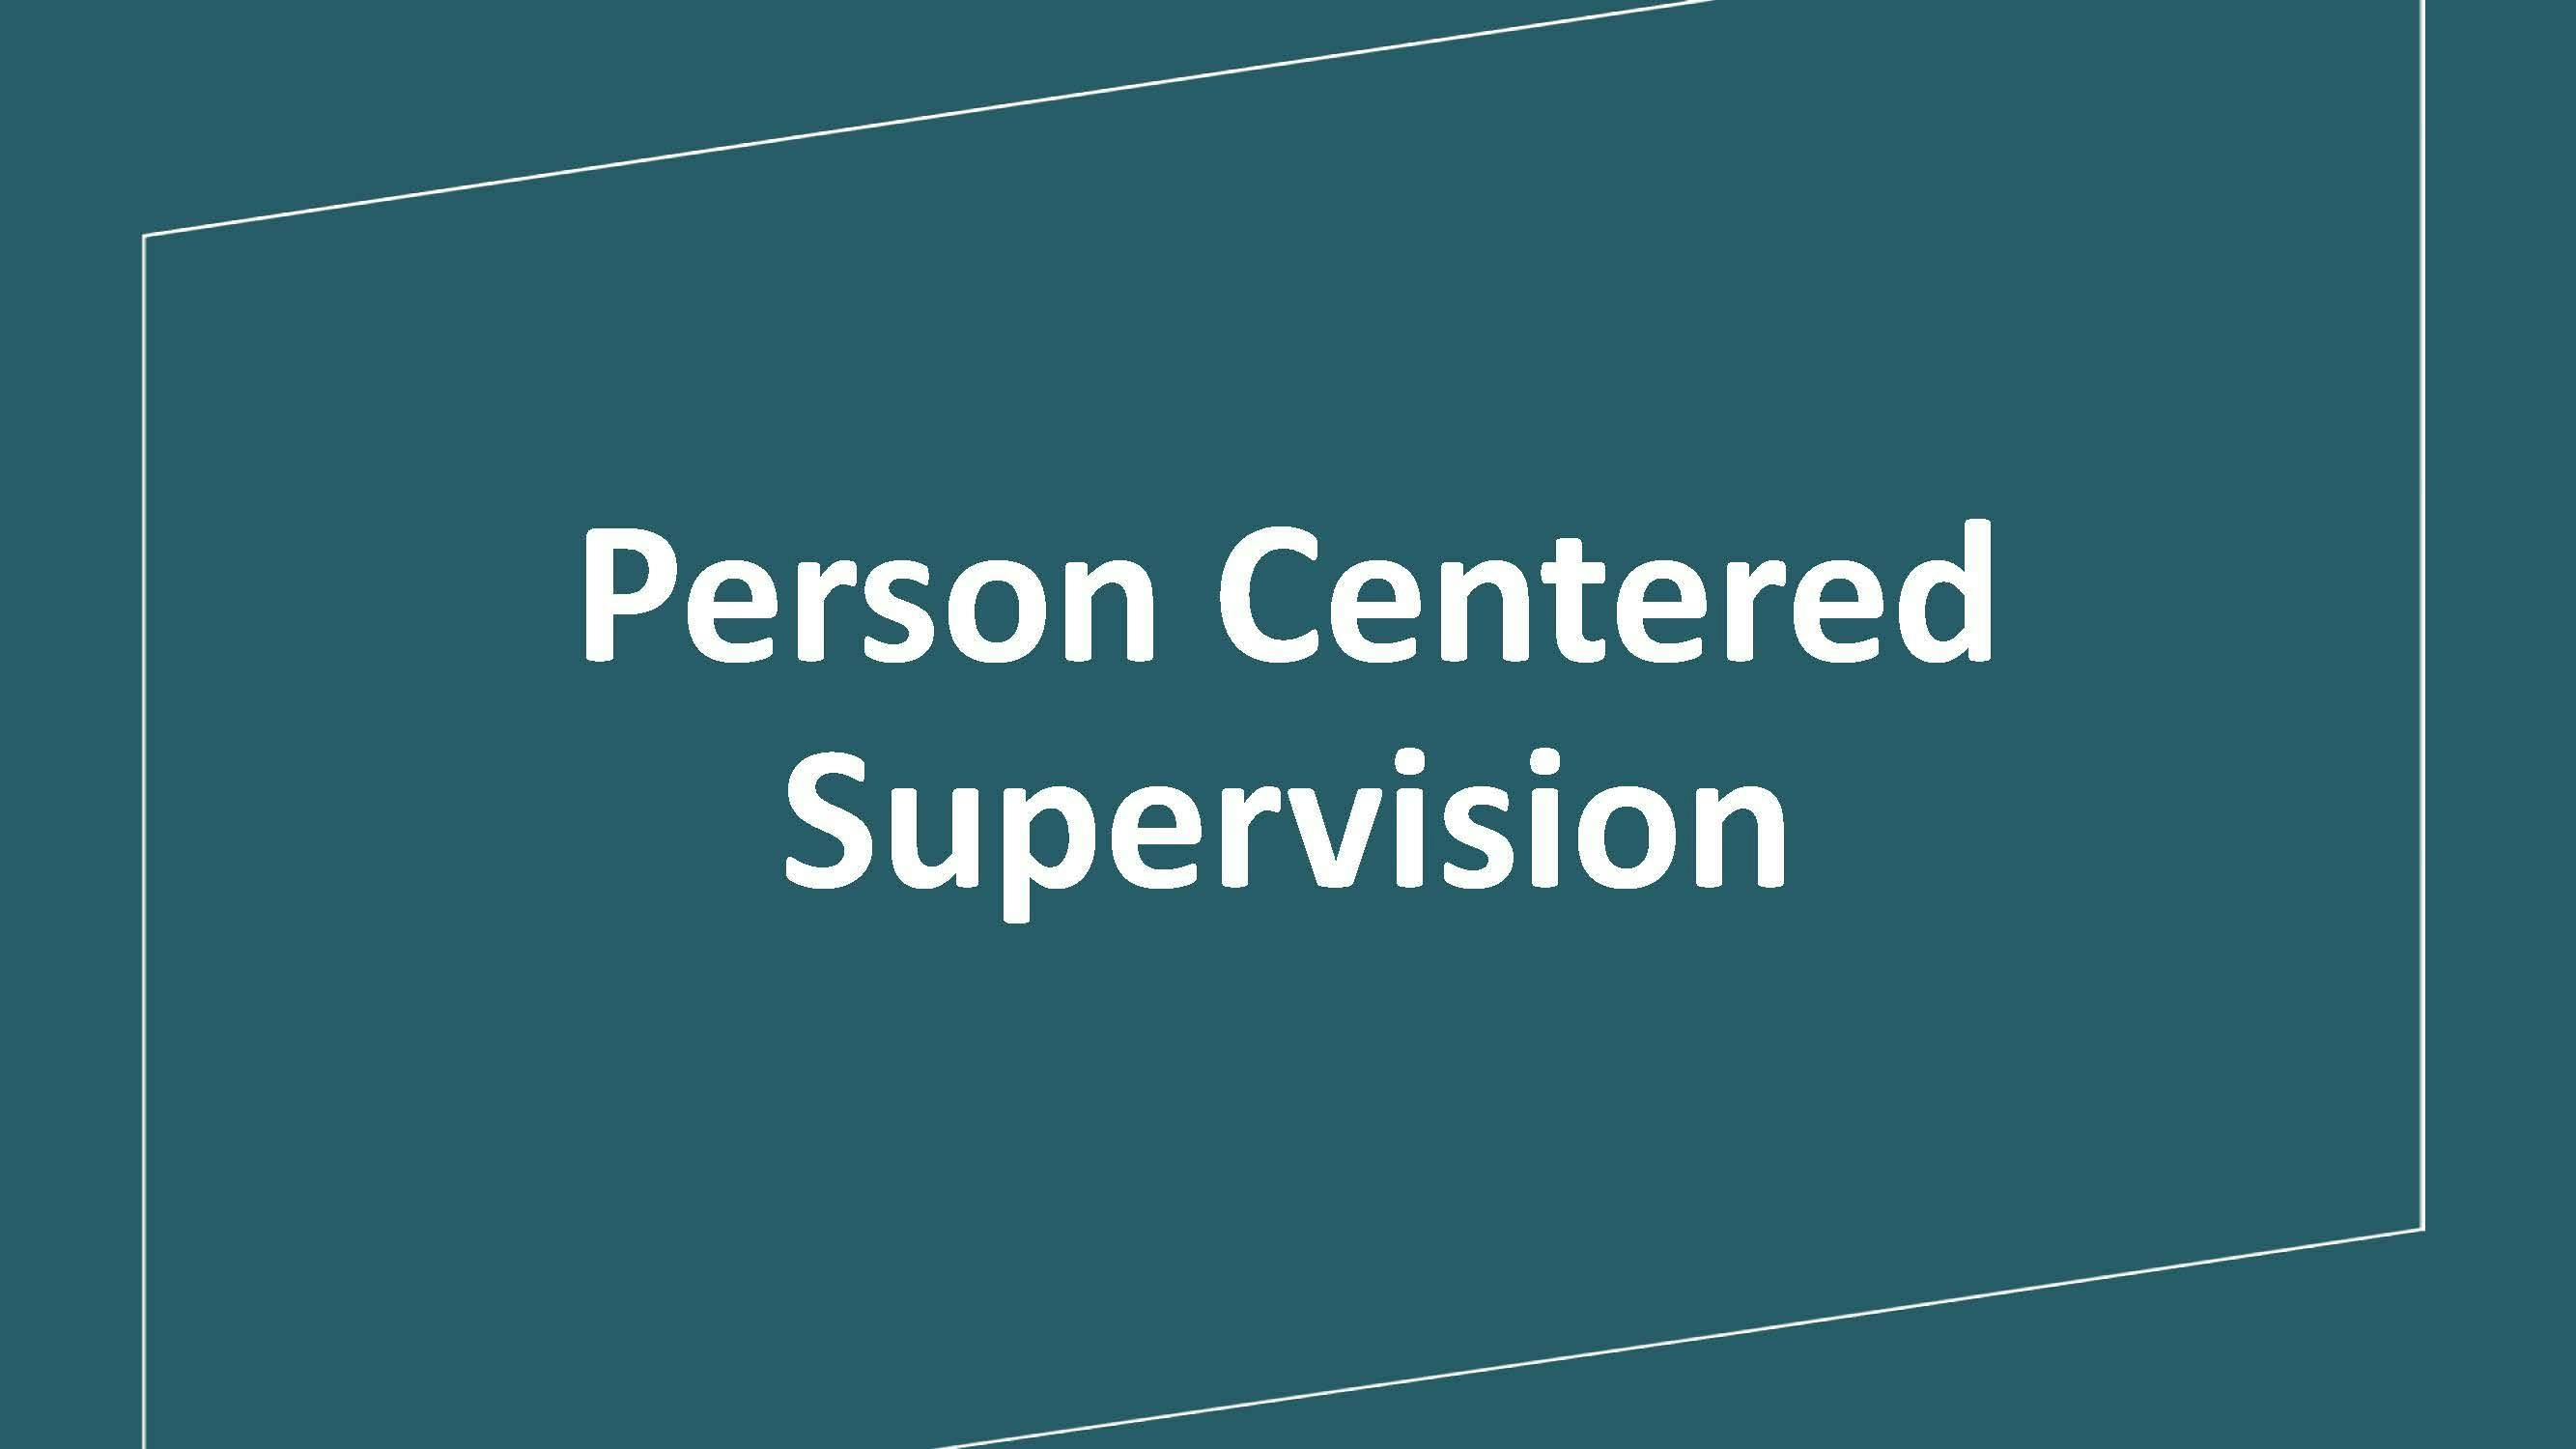 Person Centered Supervision